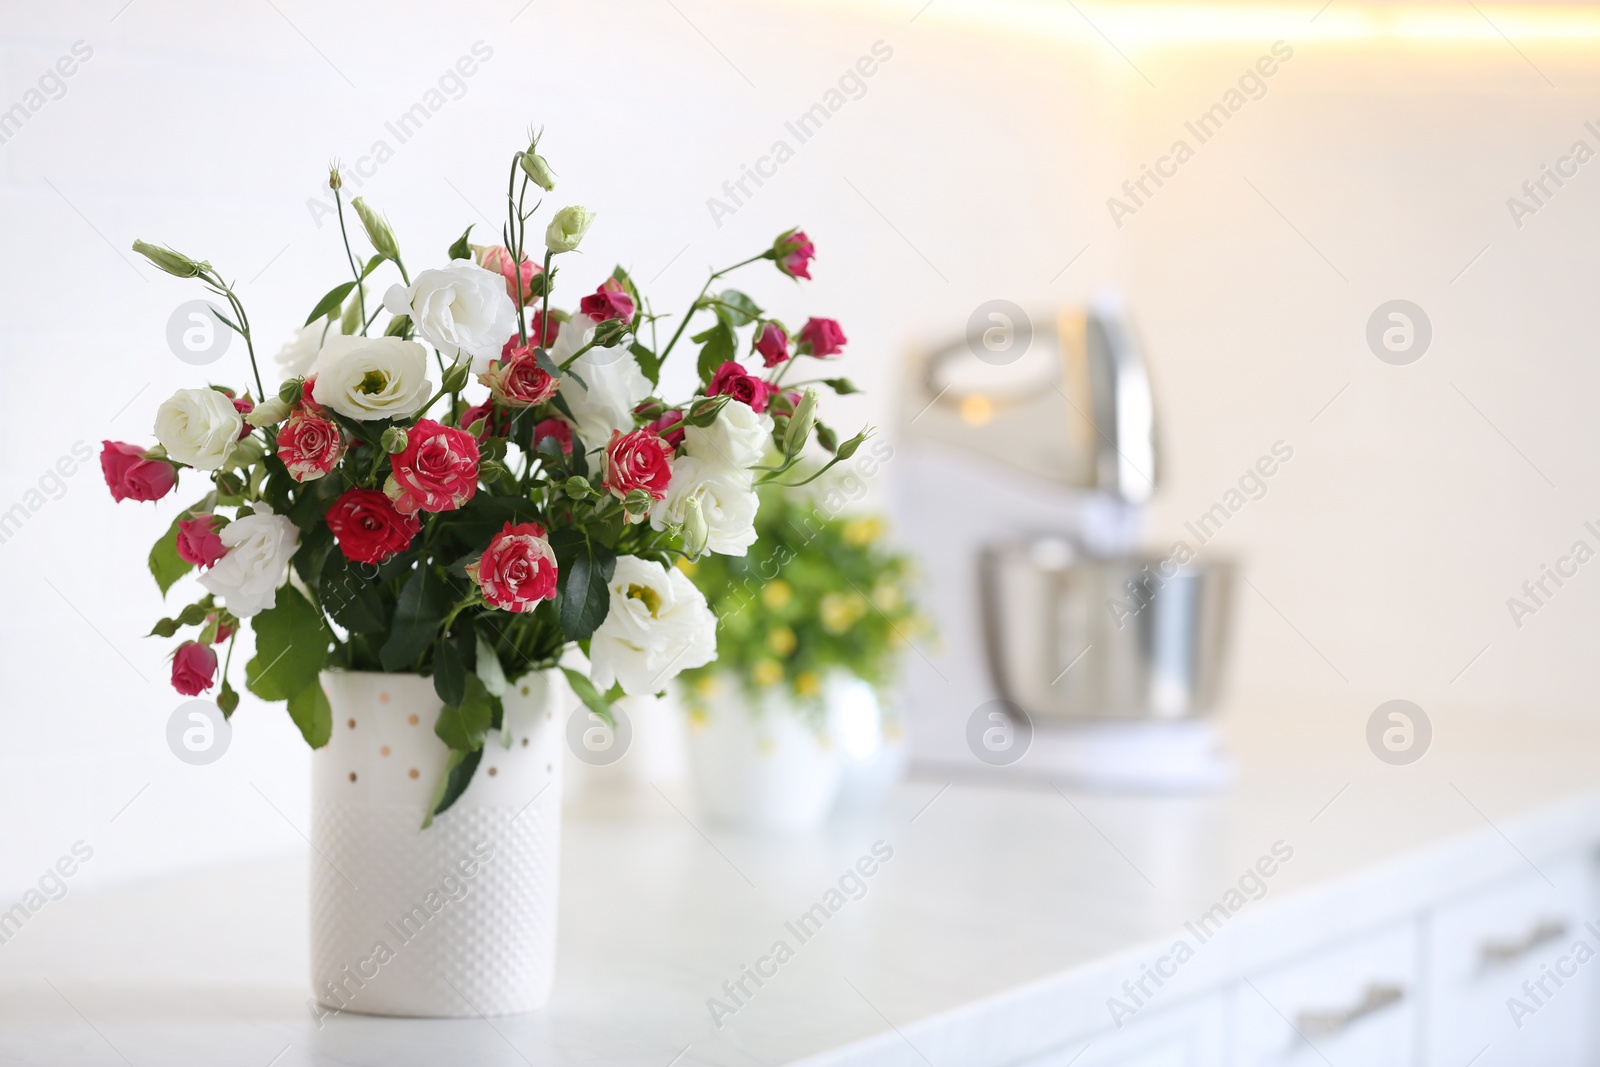 Photo of Vase with beautiful flowers on white countertop in kitchen, space for text